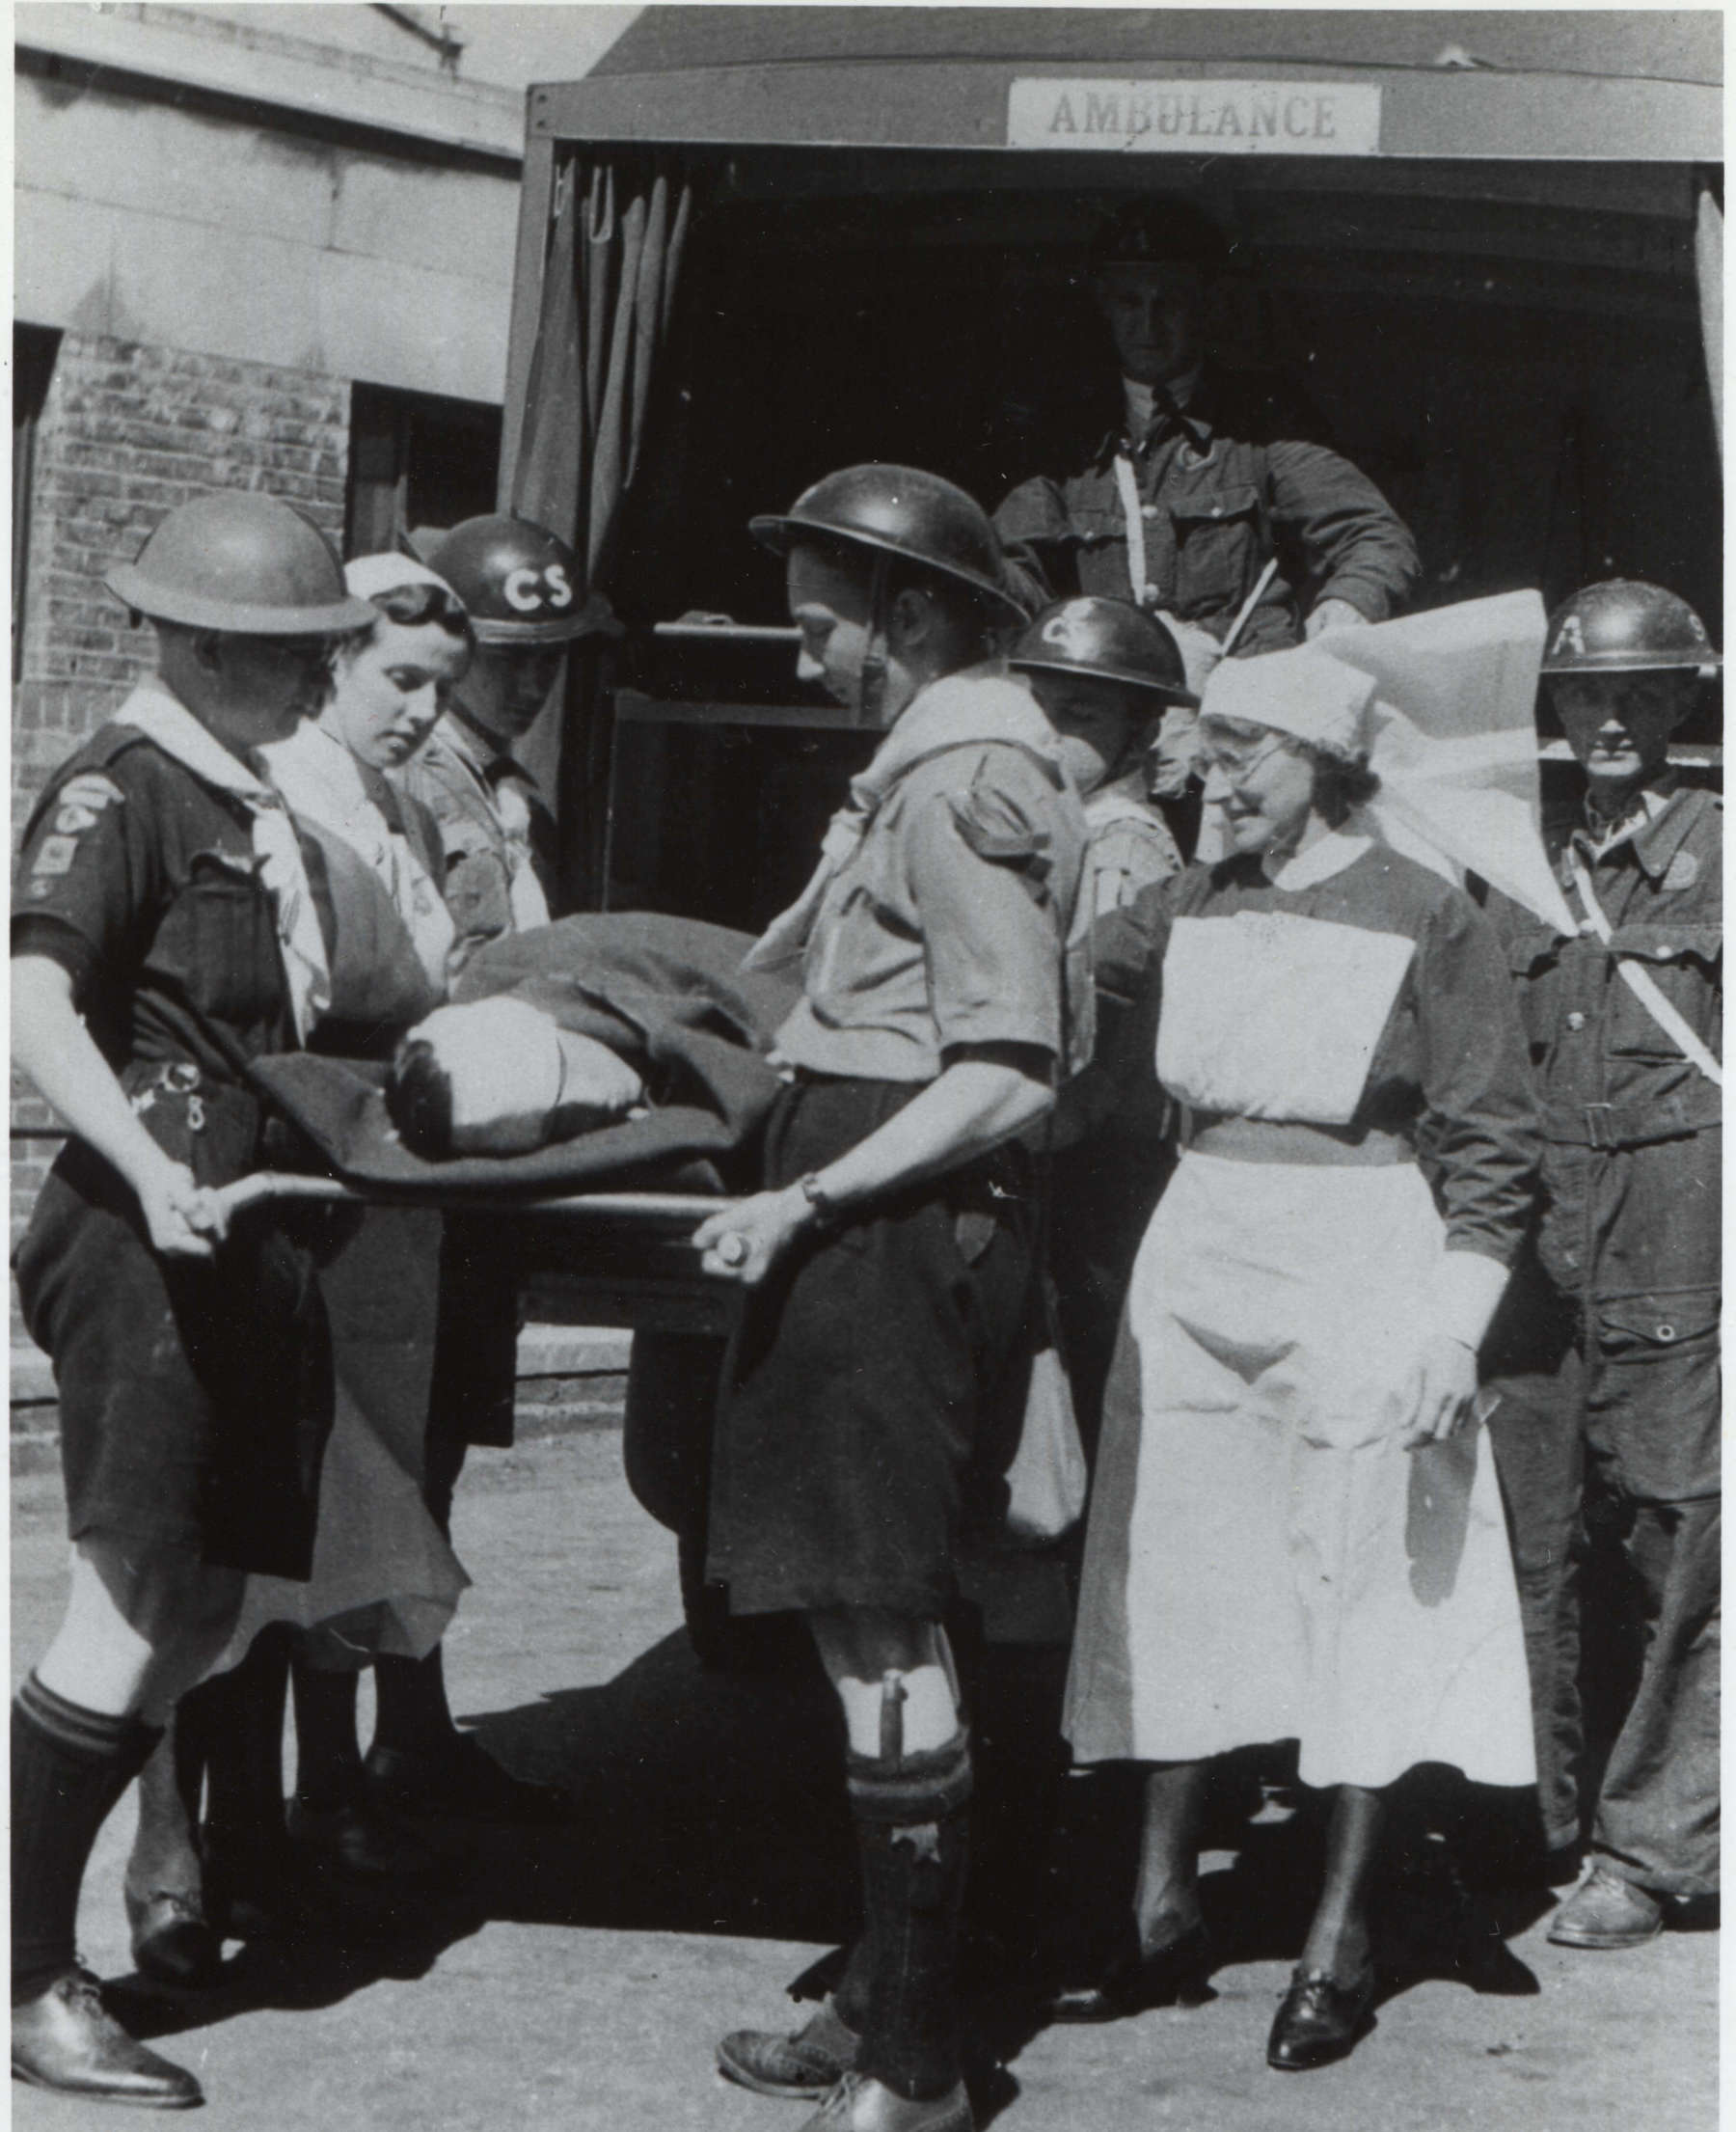 Black and white photo of a group of Scouts carrying a hospital stretcher out of the back of an ambulance